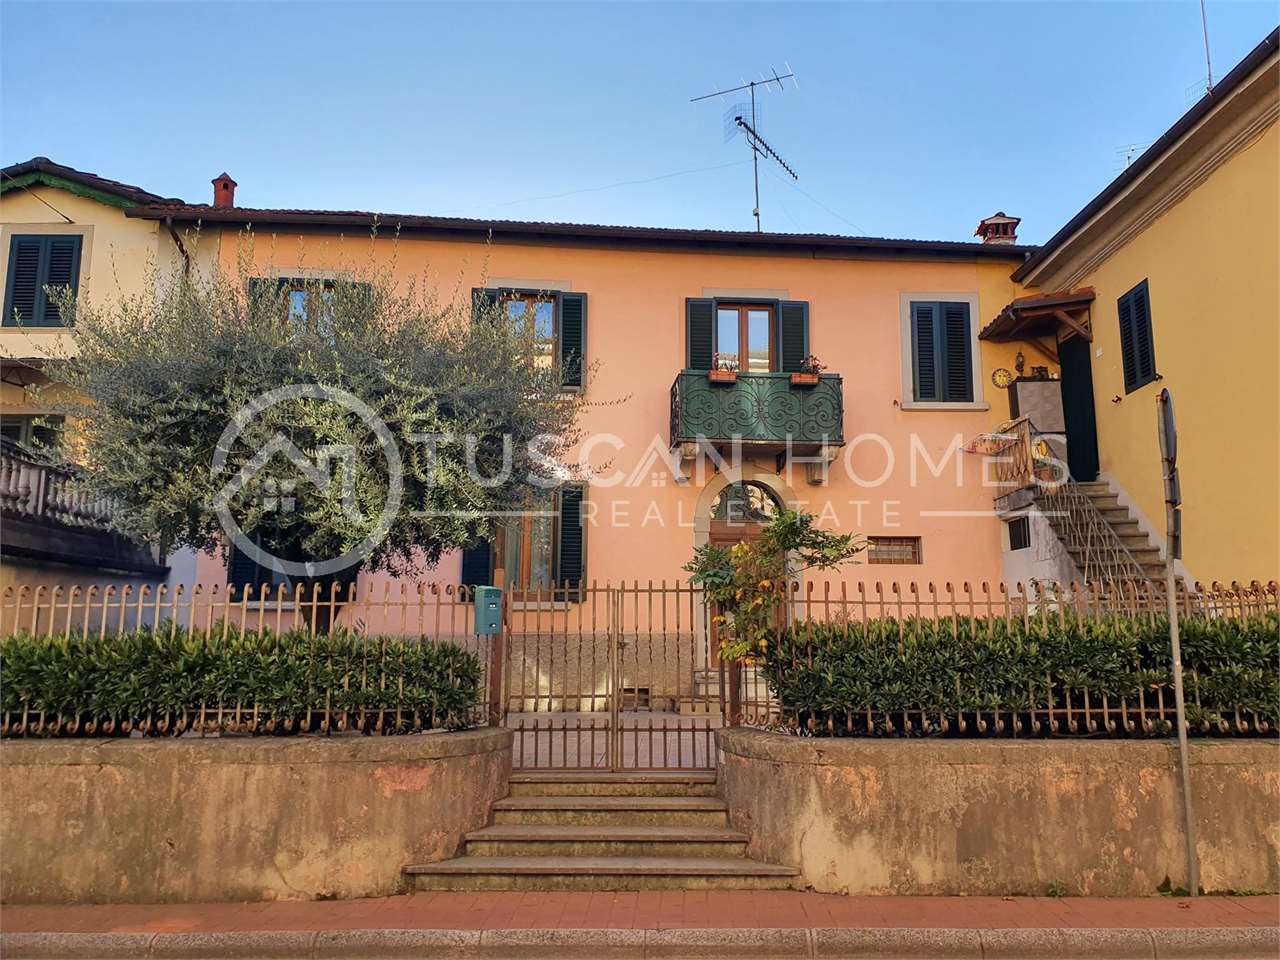 townhouse-refurbished-central-tuscany-forsale-barga-lucca